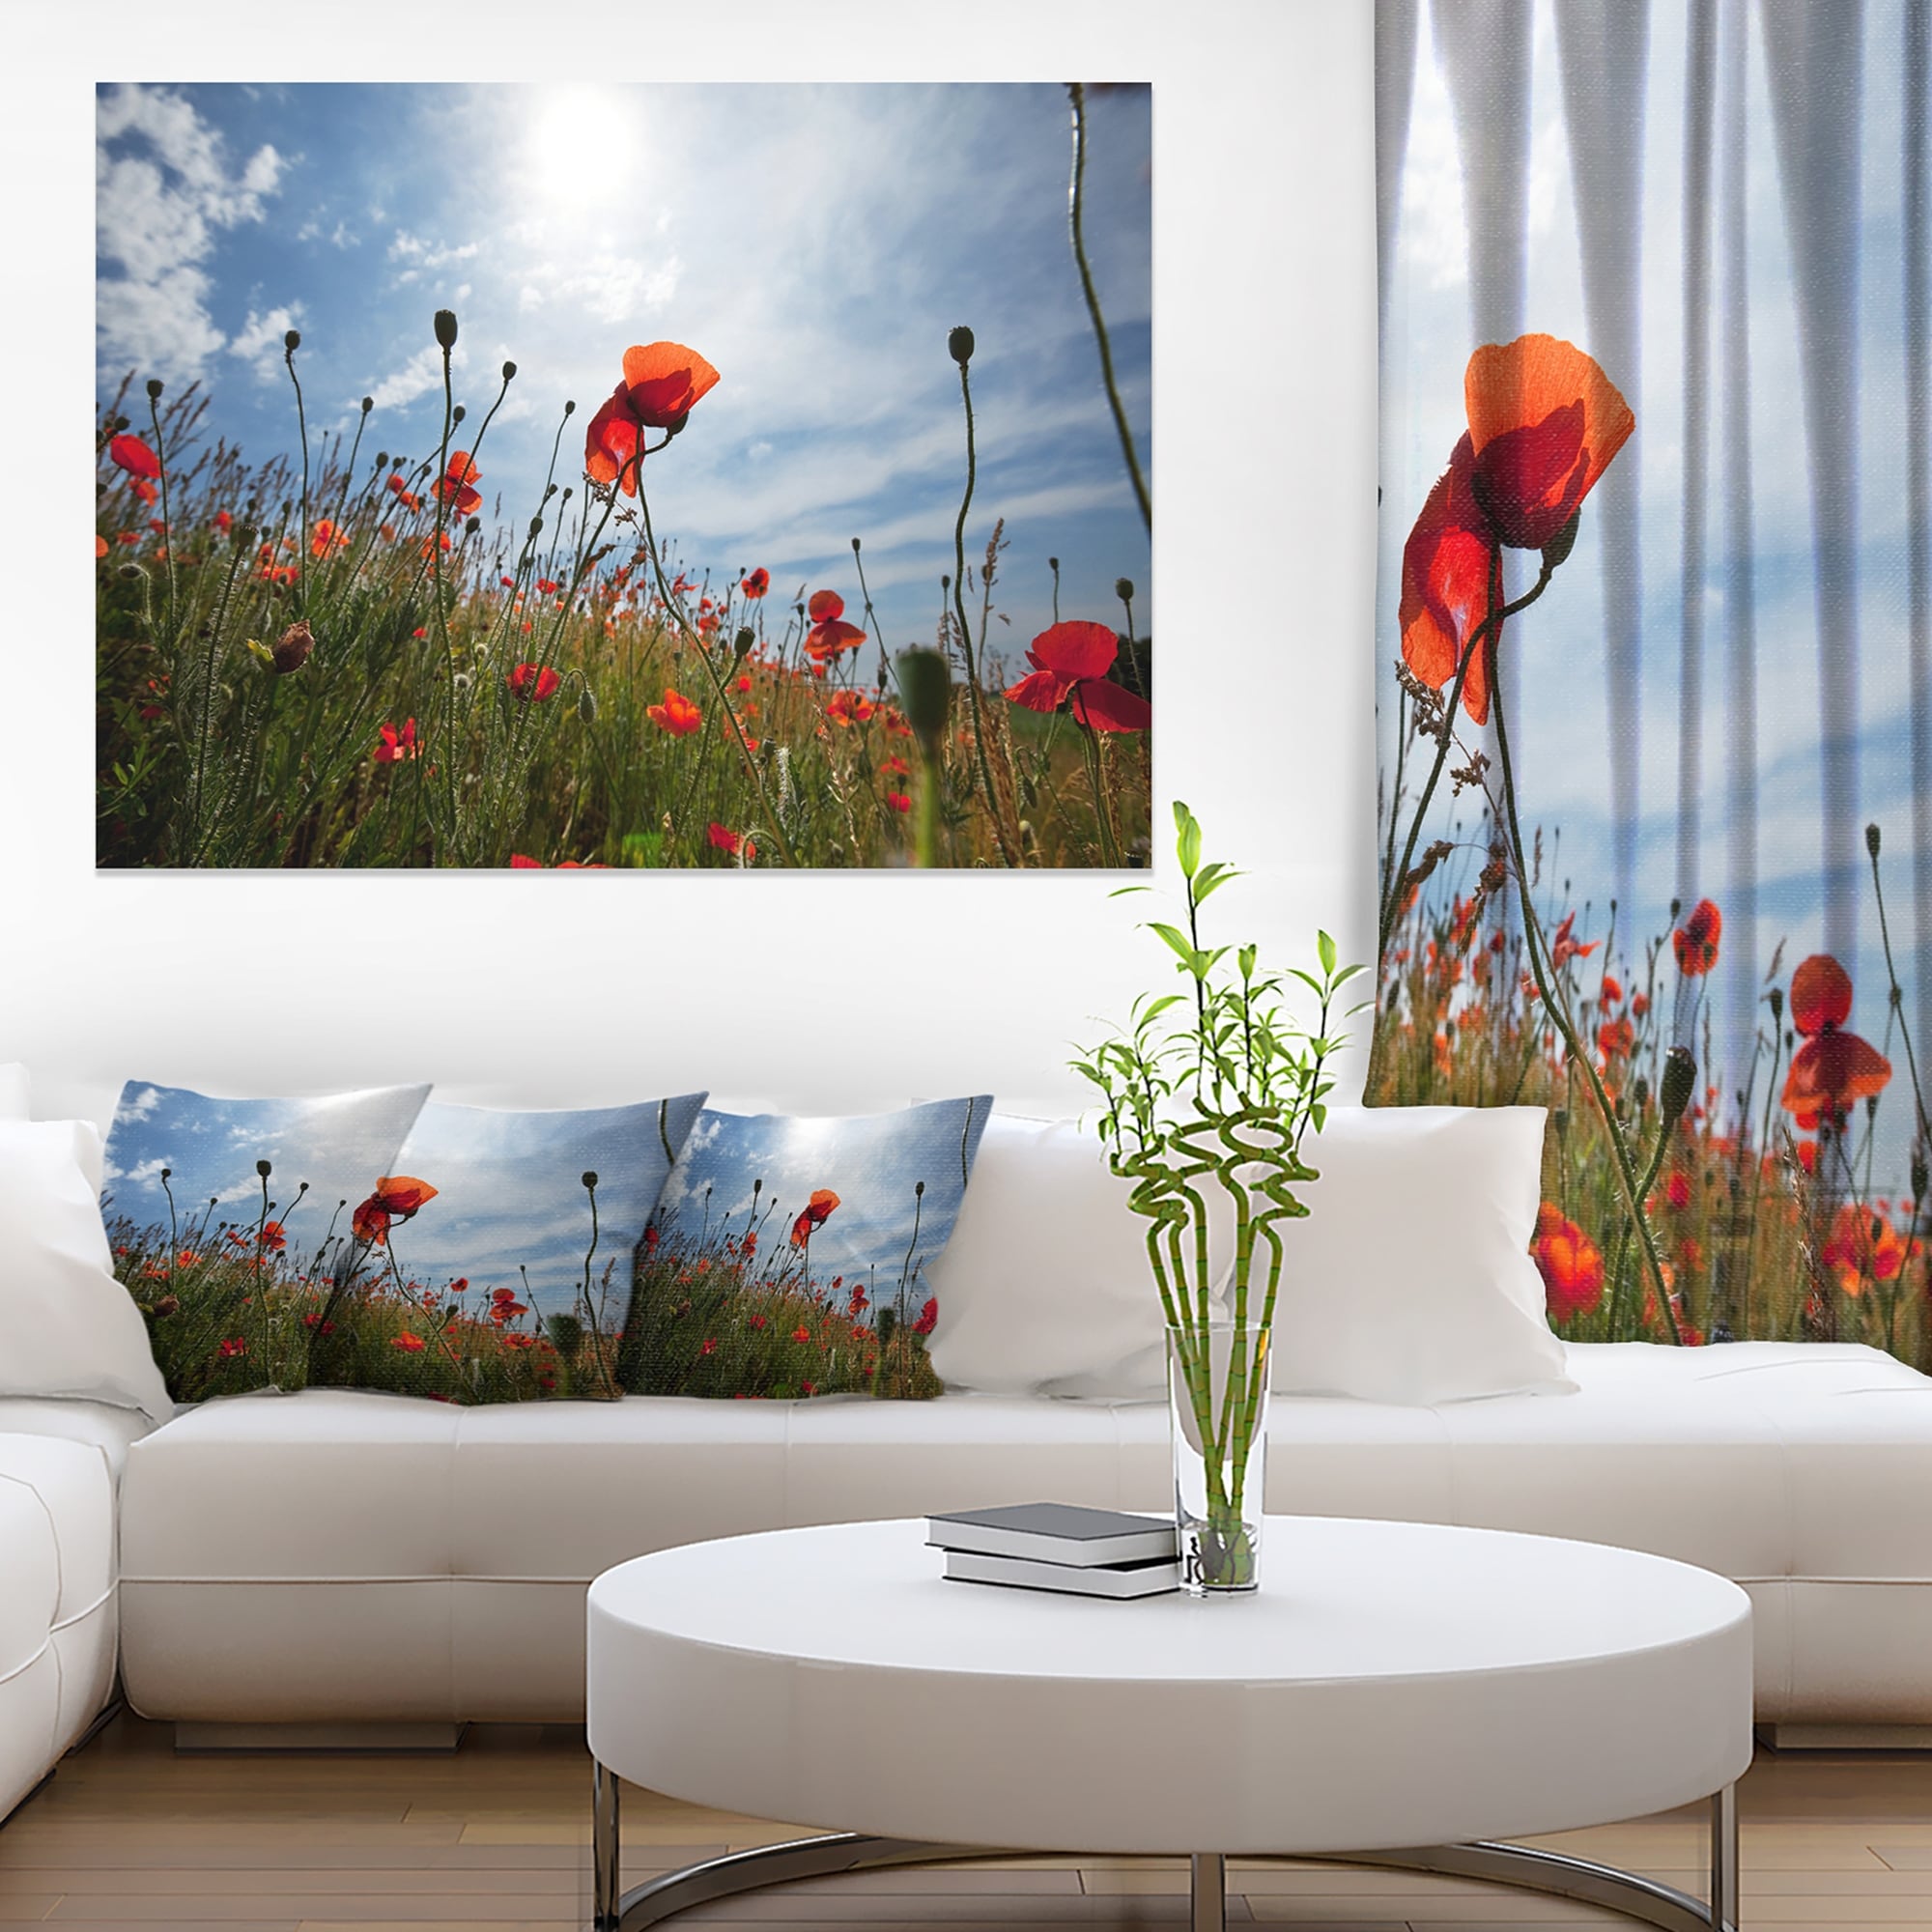 https://ak1.ostkcdn.com/images/products/is/images/direct/e9b373eab7e79123bde8357ddcc77e0191d58324/Poppy-Flower-Field-View-From-Ground---Floral-Artwork-Print-on-Canvas.jpg